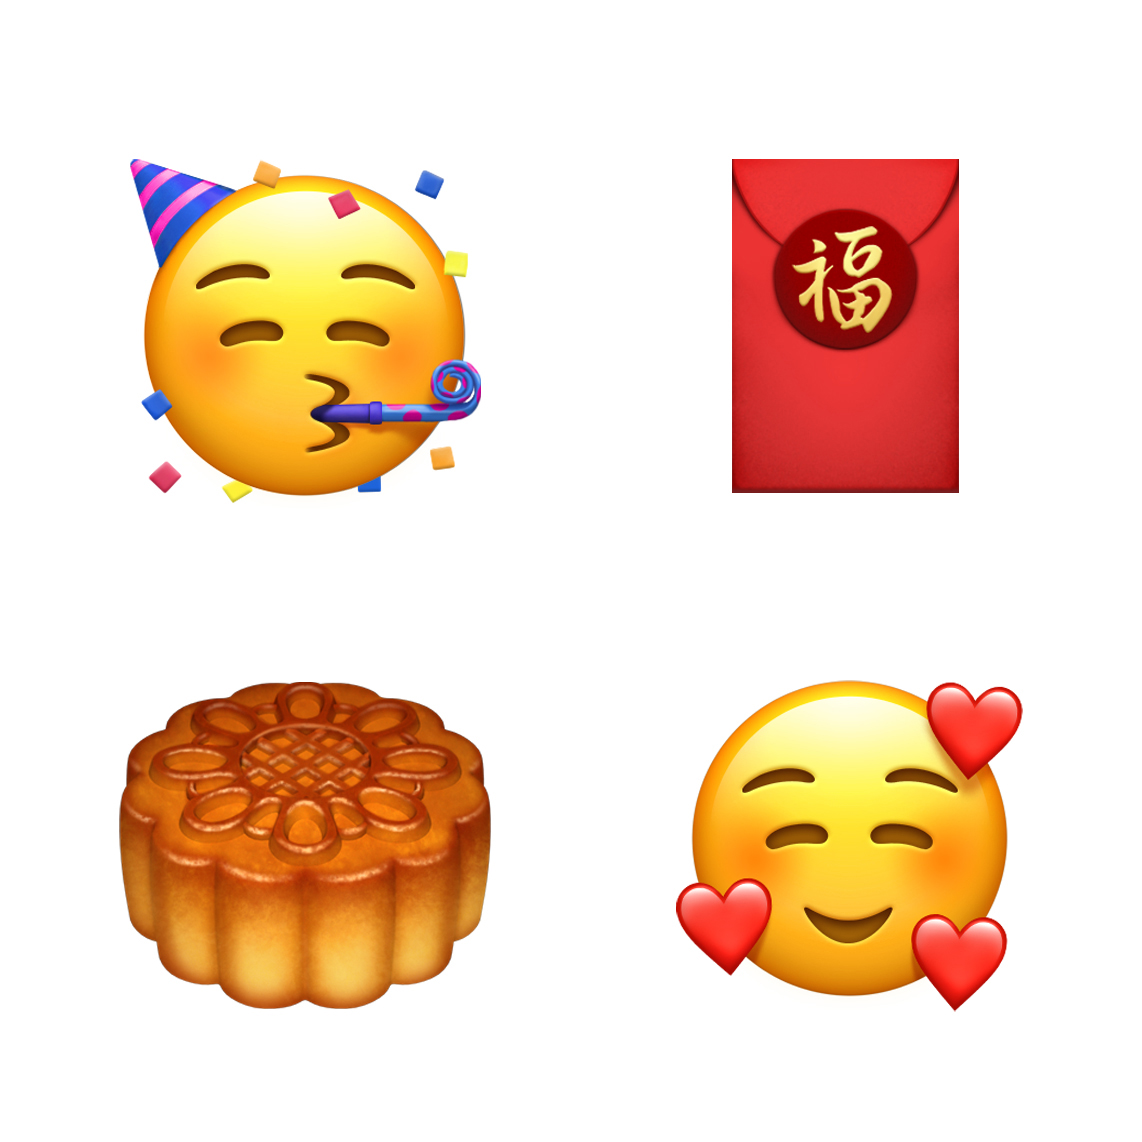 Apple Announces Over 70 New Emoji Are Coming to iOS 12.1